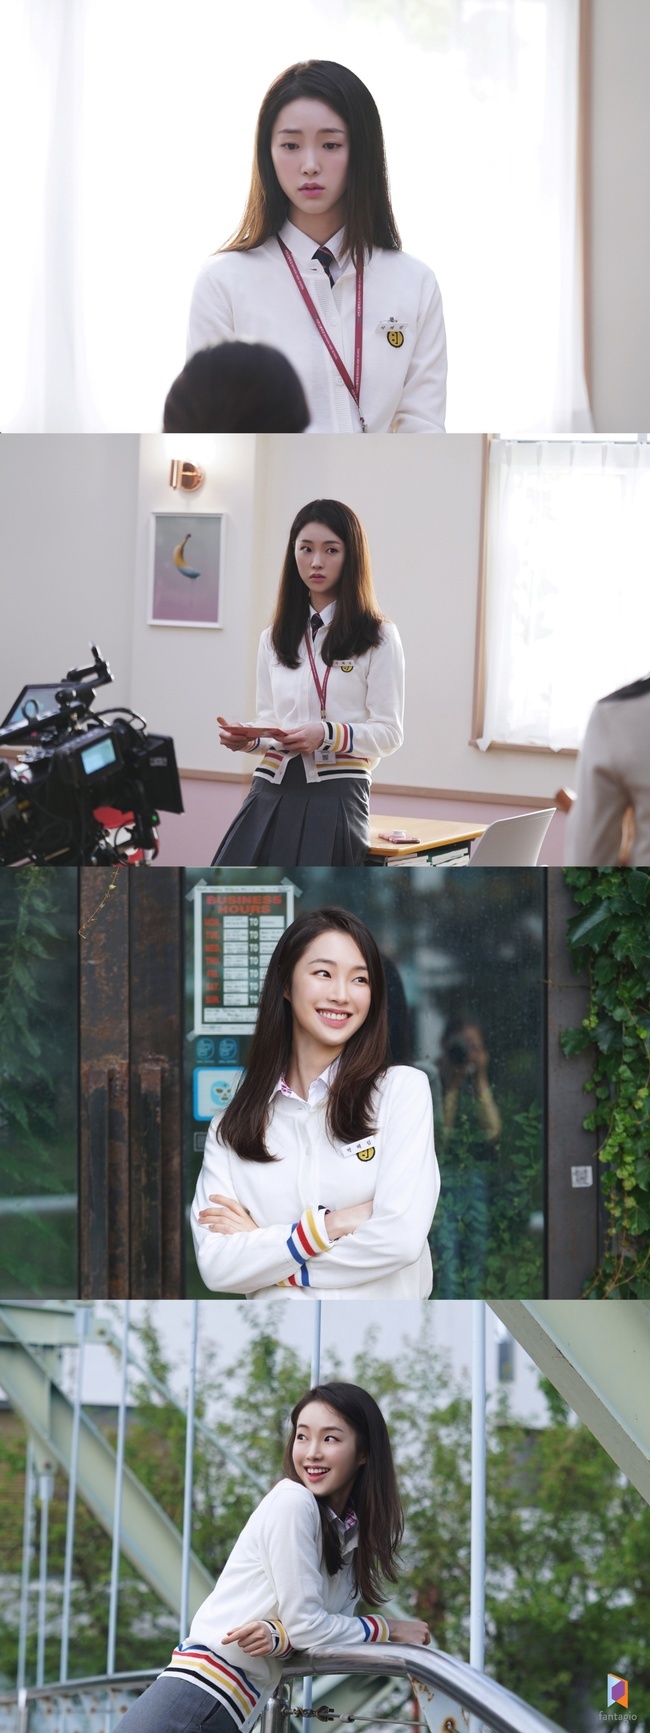 The behind-the-scenes cut ofLive On of the new Kang Haelim Co., Ltd. was released.On November 24, the agency Fantagio plays the role of Park Hye-rim, a high school student who is jealous of celebrity Dabin Jung (Director Sangwoo Kim) in JTBCs mini-seriesLive On (playplay Bang Yoo-jung, director Kim Sang-woo), leaving a strong impression on Kang Haelim Co., Ltd. The behind-the-scenes photos of.In the published photos, Kang Haelim Co., Ltd. captures the attention by creating a play and a playful atmosphere. First, in the appearance of Kang Haelim Co., Ltd., immersed in the character and filming, from the first broadcast ofLive On, you can feel the tension surrounding the home theater once again. On the other hand, the bright Miso of Kang Haelim Co., Ltd. gives a pleasant energy and makes even viewers laugh. In addition, Kang Haelim Co., Ltd. exudes a lovely charm with playful eyes and laughter that were not seen in the play.Kang Haelim Co., Ltd. said through the agency that day, After watching the first broadcast, I remembered the atmosphere of the scene when I filmed. I had little experience in the drama scene, so I was very unfamiliar and nervous, but personally, I think that feeling is felt on the screen. It was a little regrettable, he said on the first broadcast. He added, Ill show you my progress, so please watch my performance in the remaining broadcasts in the future.Kang Haelim Co., Ltd. debuted with the web dramaIdol Authority in 2017, and made its face known with various advertising models. Since then, KBS JoysTampering in Love has attracted a lot of attention with her innocent appearance and realistic acting.Meanwhile, the second drama chemistry romance dramaLive On will be broadcast on JTBC at 9:30 pm on the 24th.